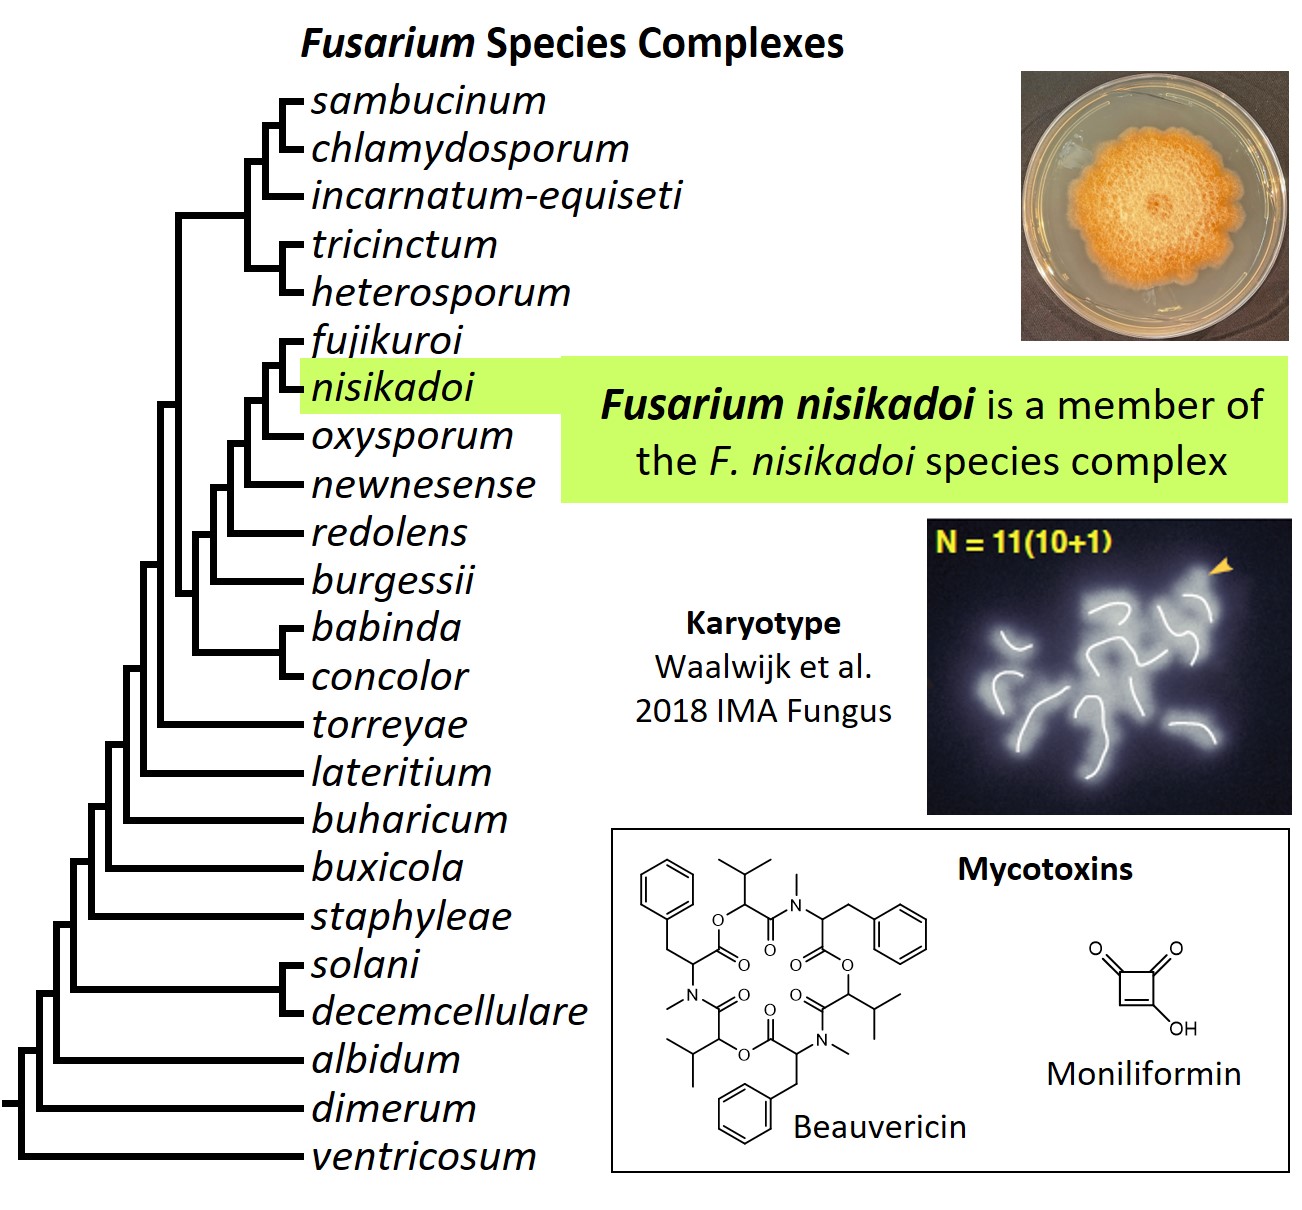 Left – tree showing phylogenetic relationships of the 23 Fusarium species complexes and placement of
F. nisikadoi within the F. nisikadoi species complex. In the tree, species complex names are abbreviated
using specific epithets of the species after which the complexes are named (e.g., the F. sambucinum
species complex is abbreviated as sambucinum). Upper right – culture of F. nisikadoi NRRL 25179
growing on potato dextrose agar medium. Middle right – karyotype of F. nisikadoi strain NRRL 25203.
Lower right – chemical structures of the mycotoxins beauvericin and moniliformin. [Image credit: Robert H. Proctor, Amy McGovern and Crystal Probyn]